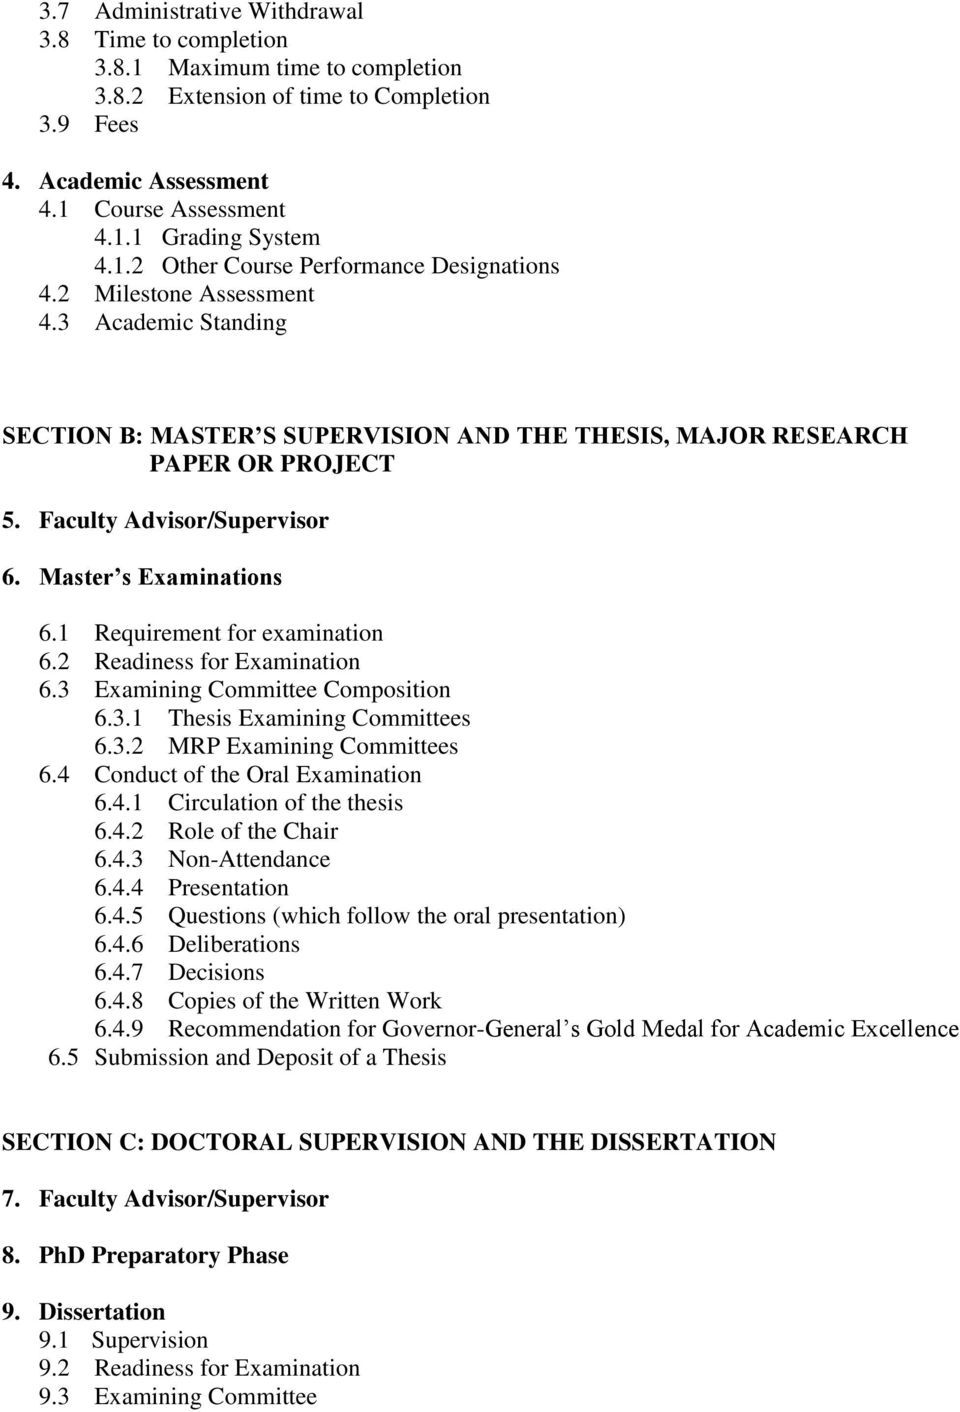 Faculty Advisor/Supervisor 6. Master s Examinations 6.1 Requirement for examination 6.2 Readiness for Examination 6.3 Examining Committee Composition 6.3.1 Thesis Examining Committees 6.3.2 MRP Examining Committees 6.